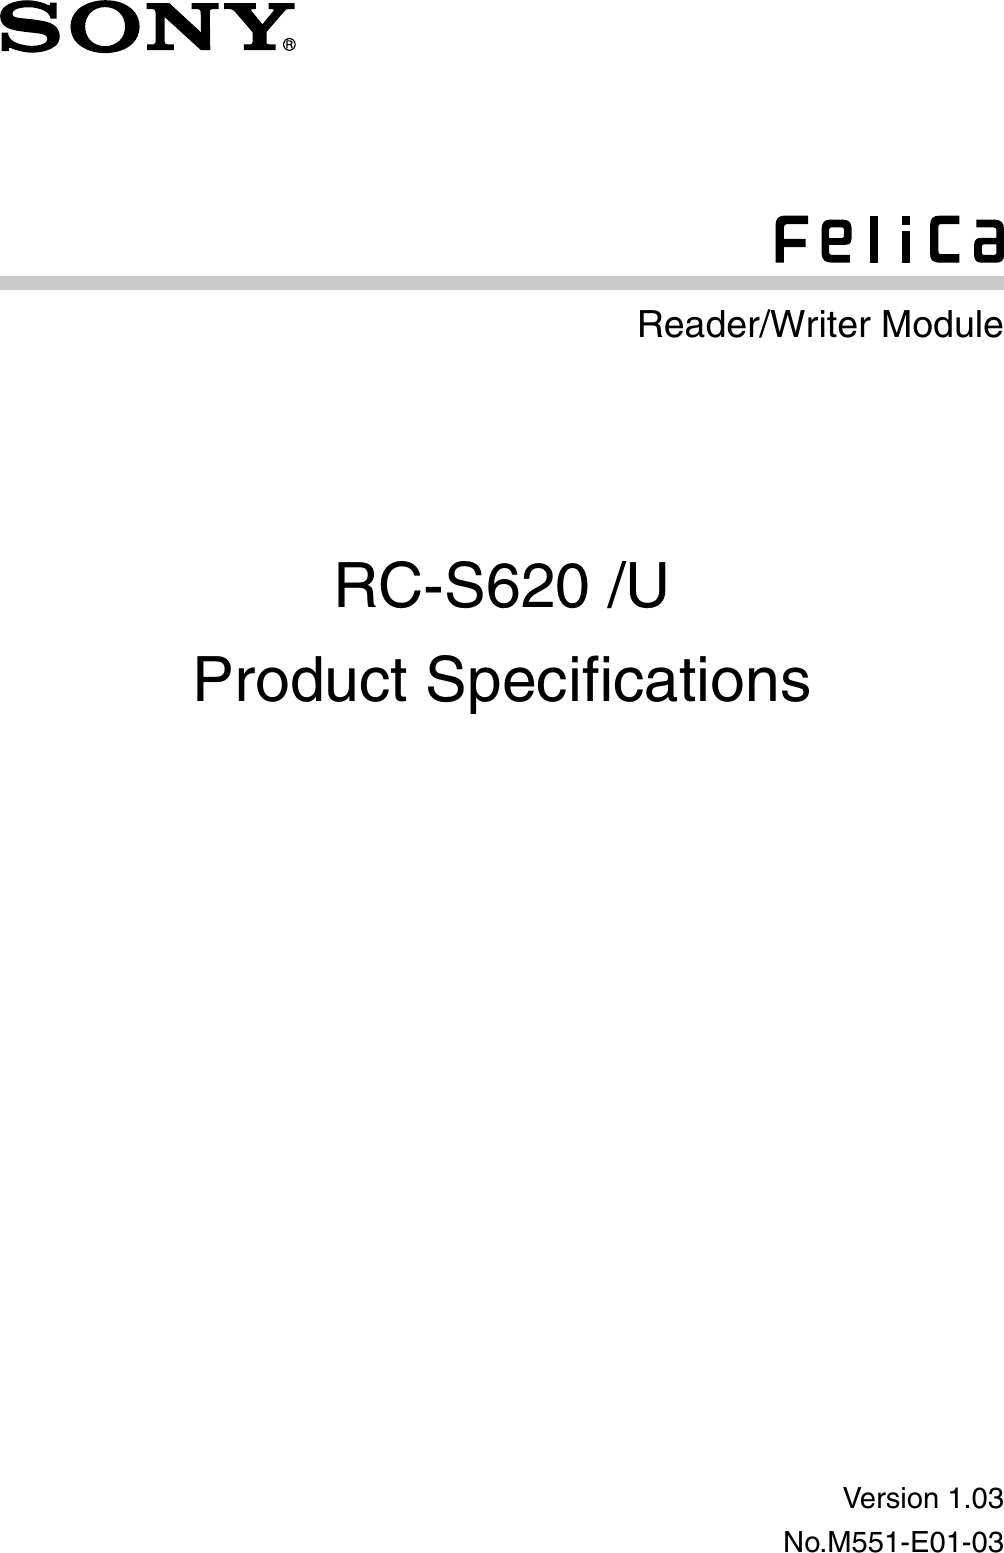 RC-S620 /UProduct Speciﬁcations Reader/Writer ModuleVersion 1.03No.M551-E01-03